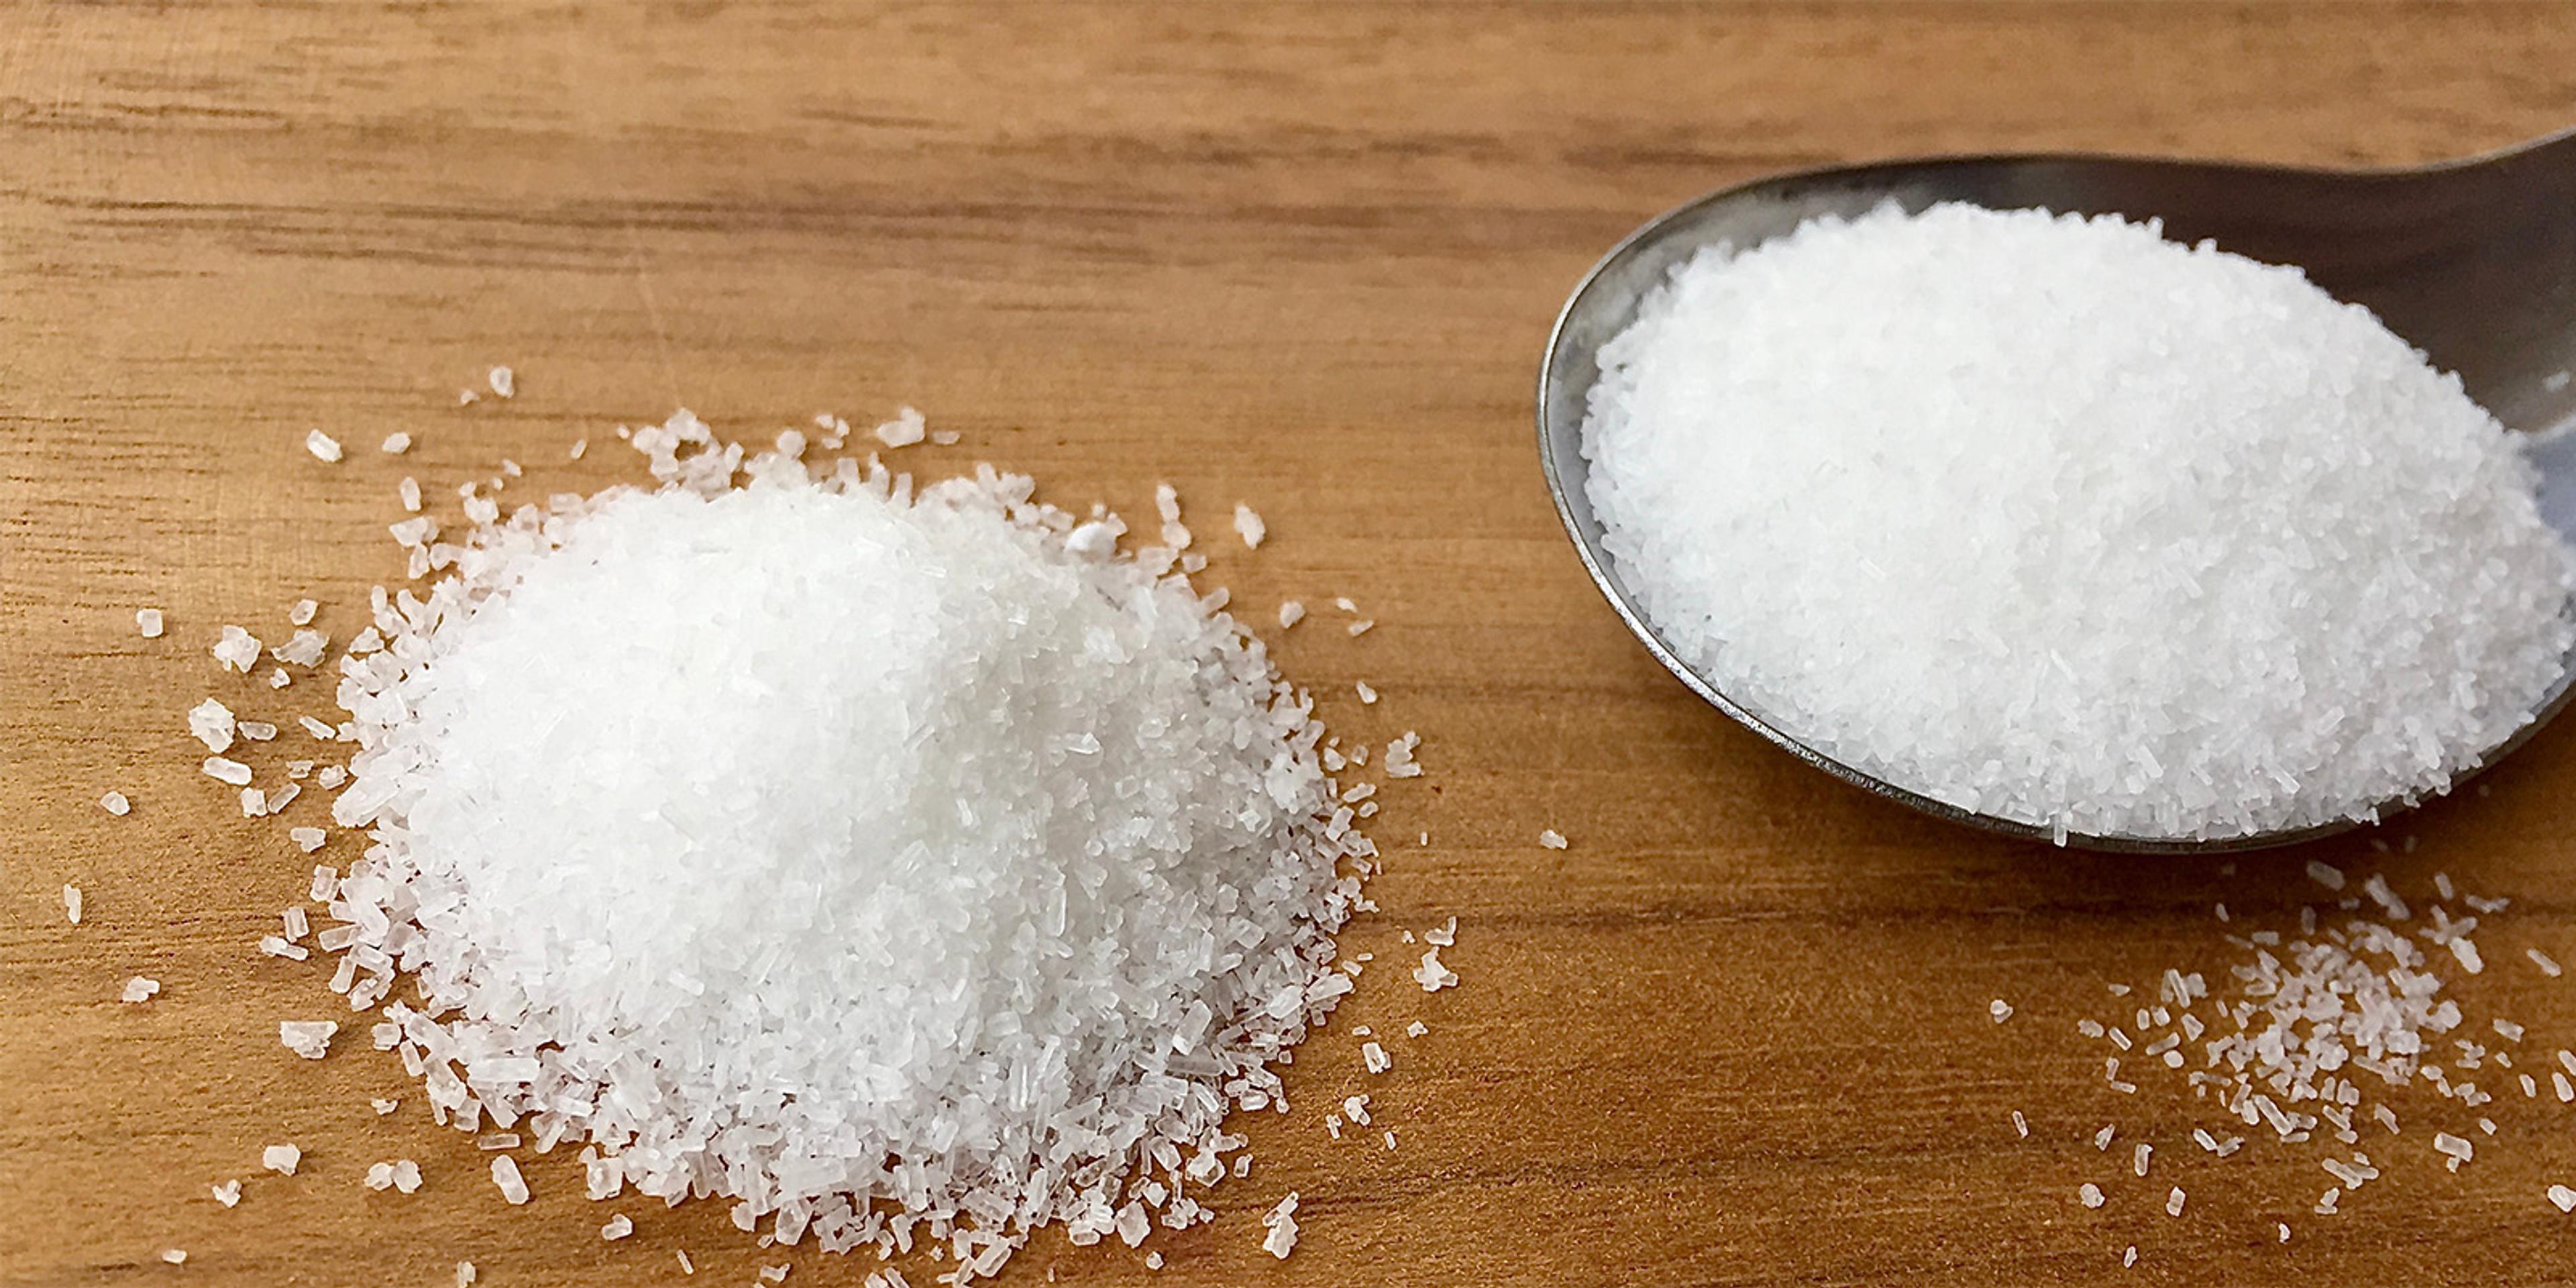 A spoonful of salt on a table.